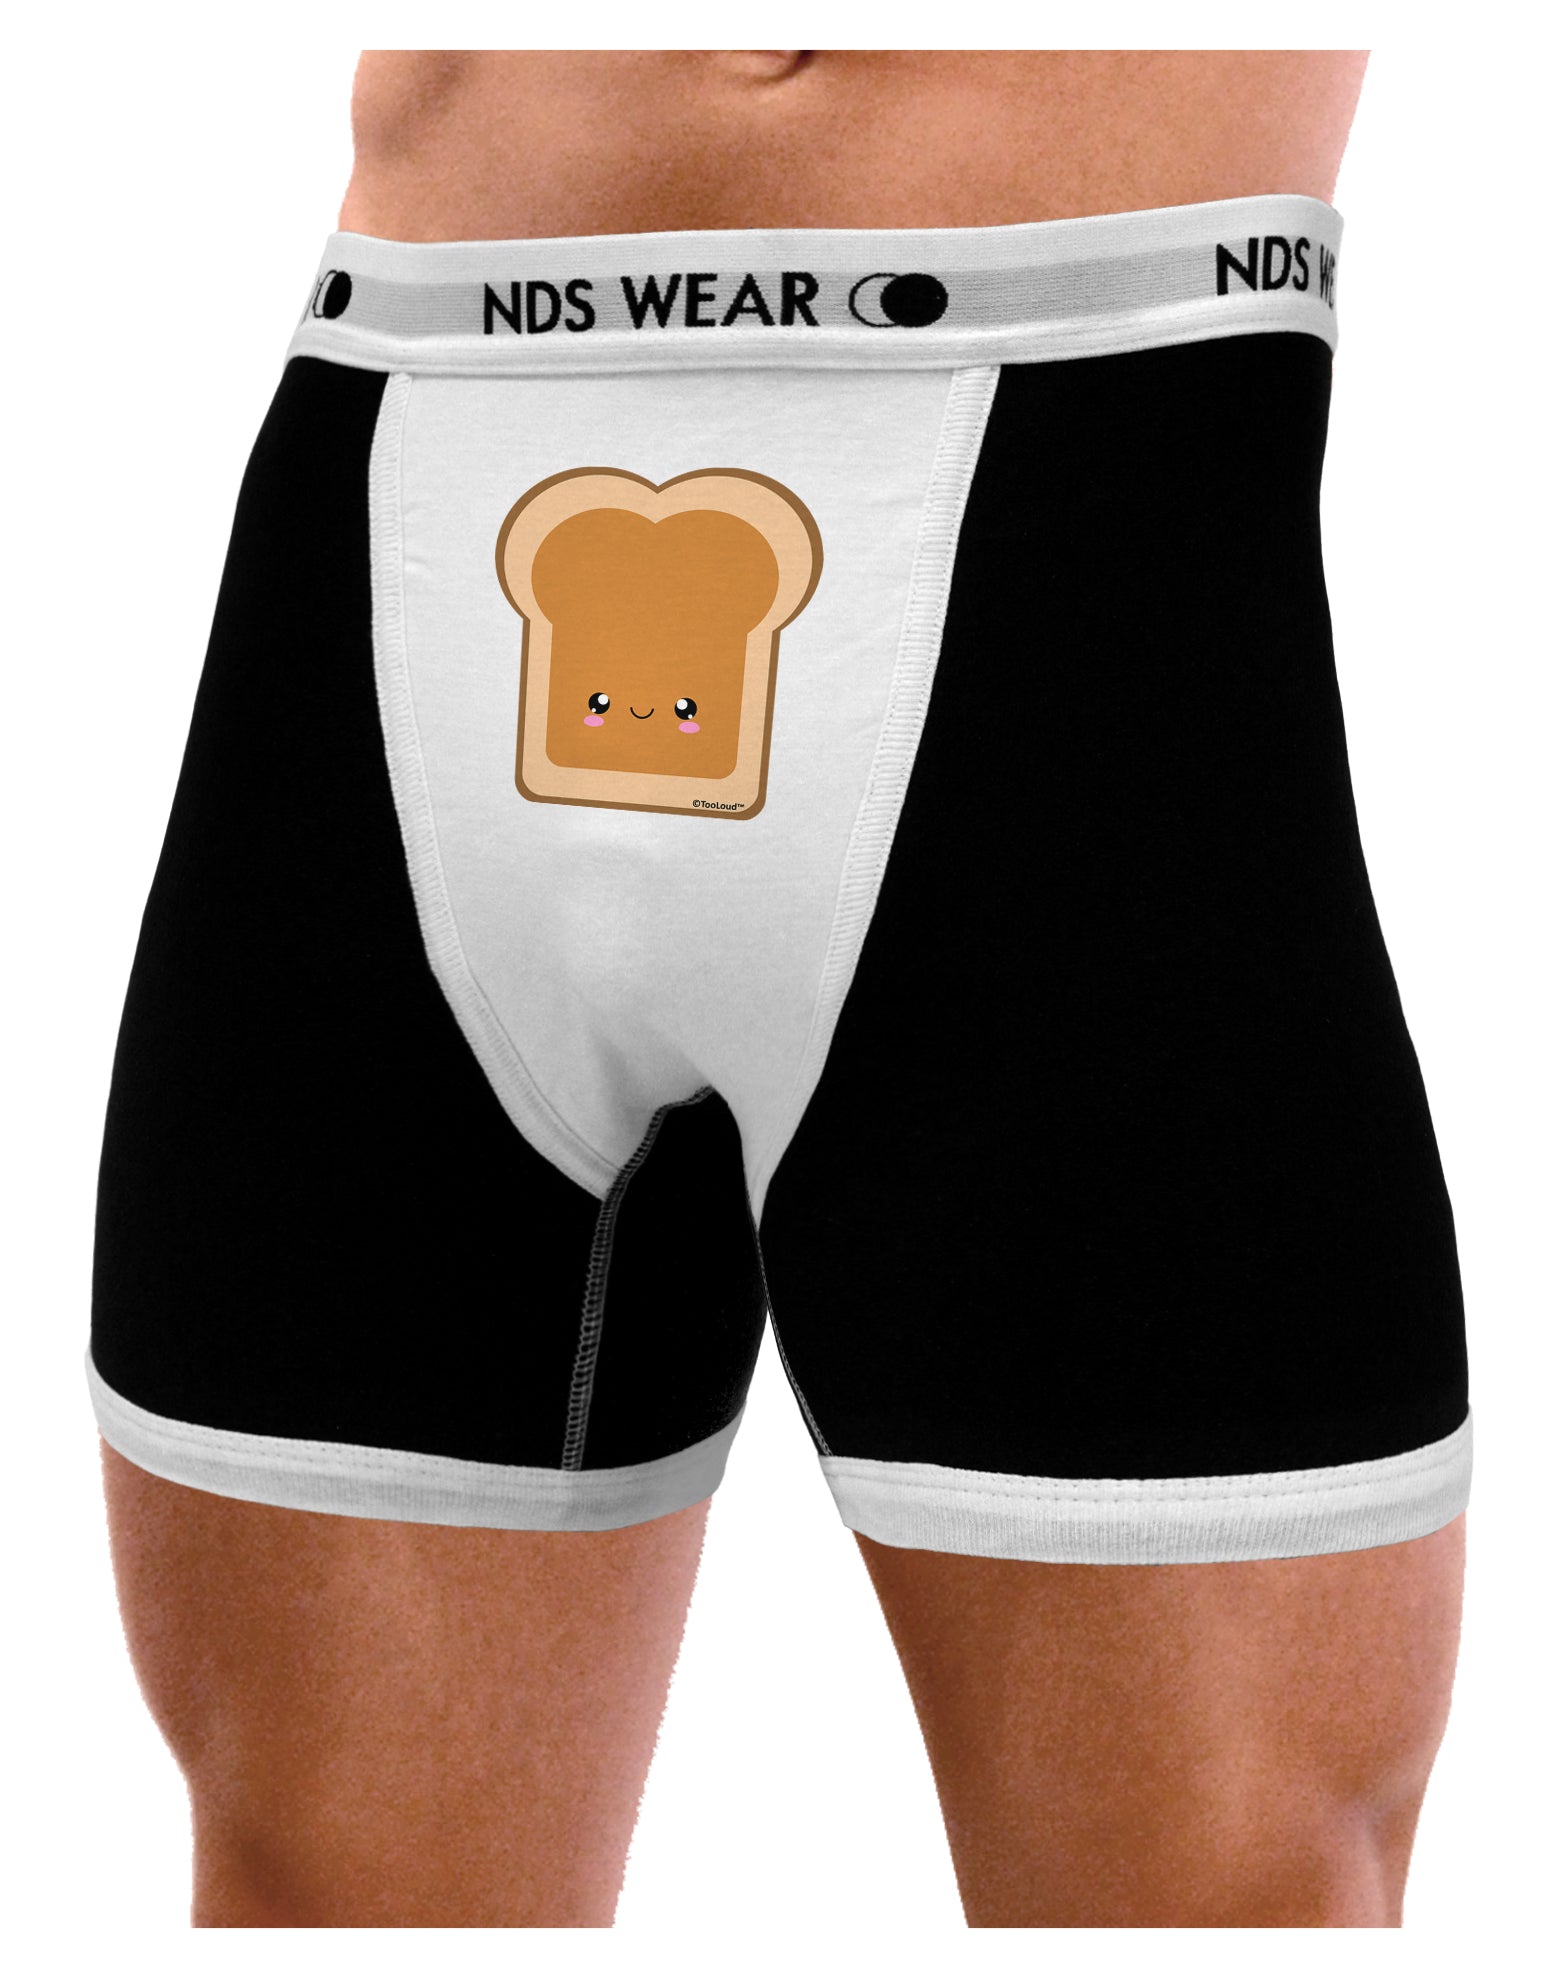 Cute Matching Design - PB and J - Peanut Butter Mens NDS Wear Boxer Brief  Underwear by TooLoud